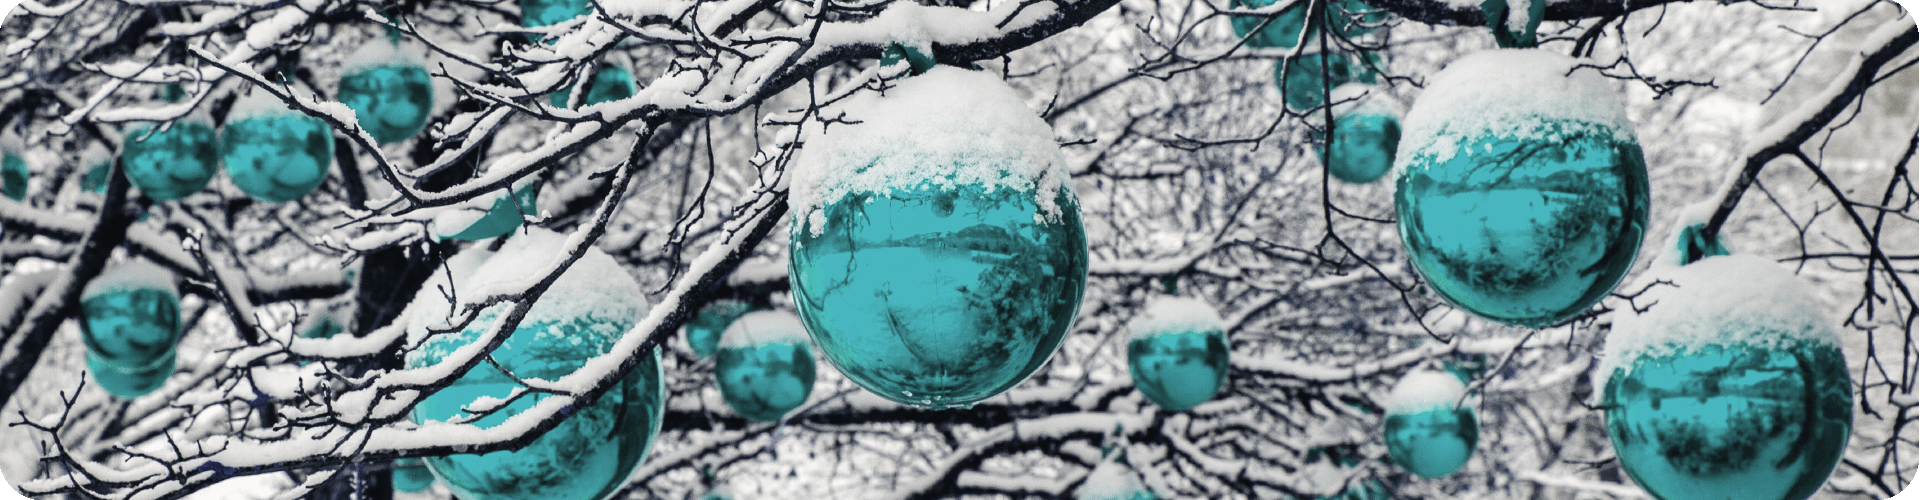 christmas baubles covered in snow hanging from a tree